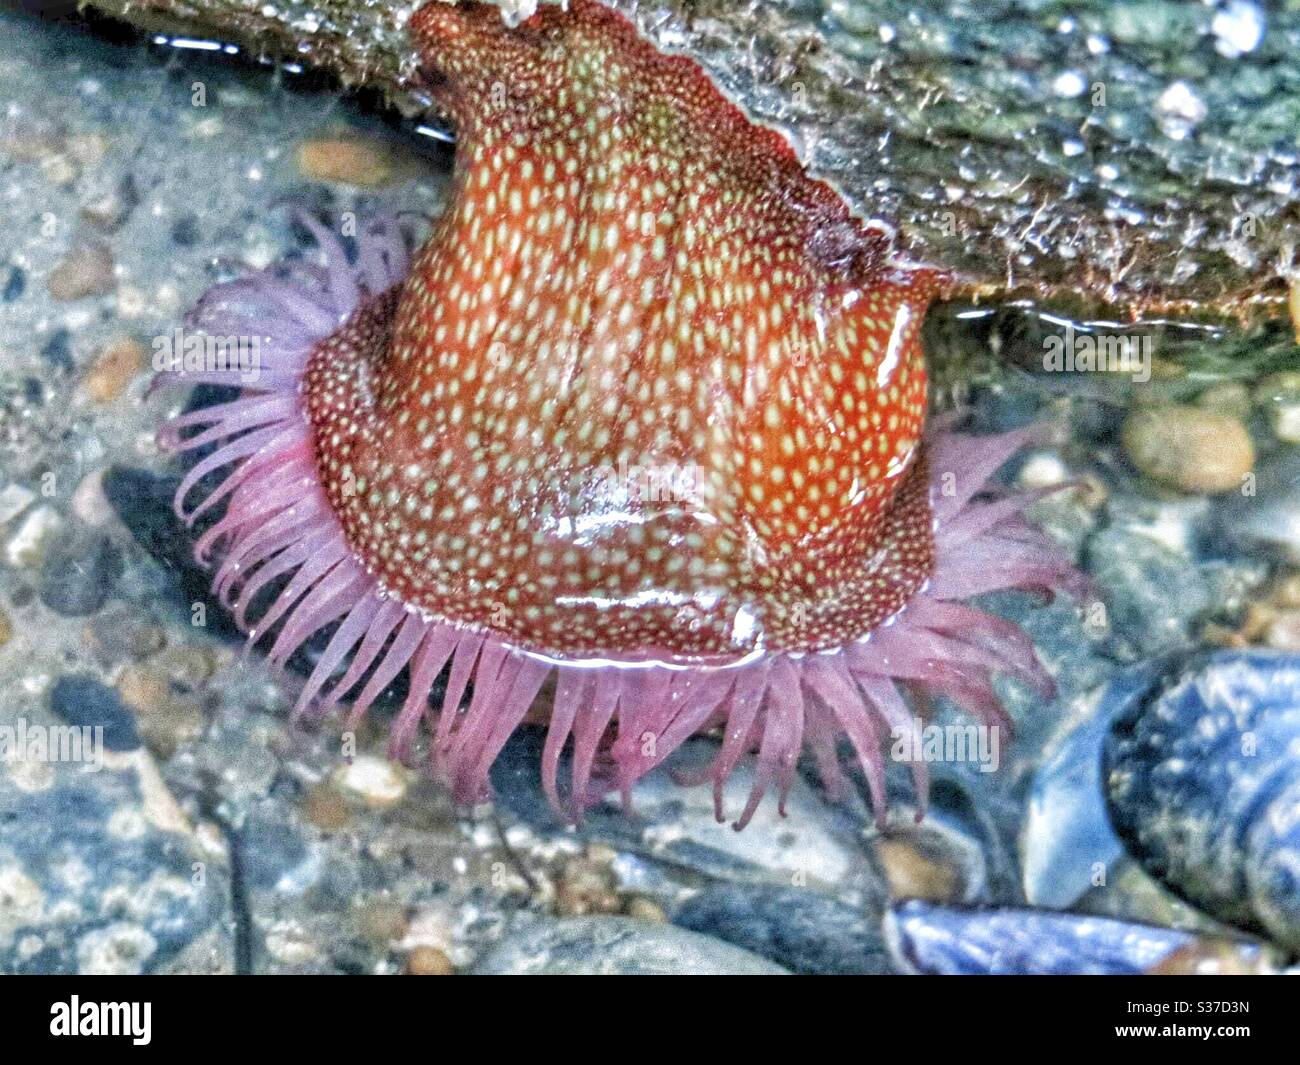 Strawberry sea anemone found in a rock pool Stock Photo